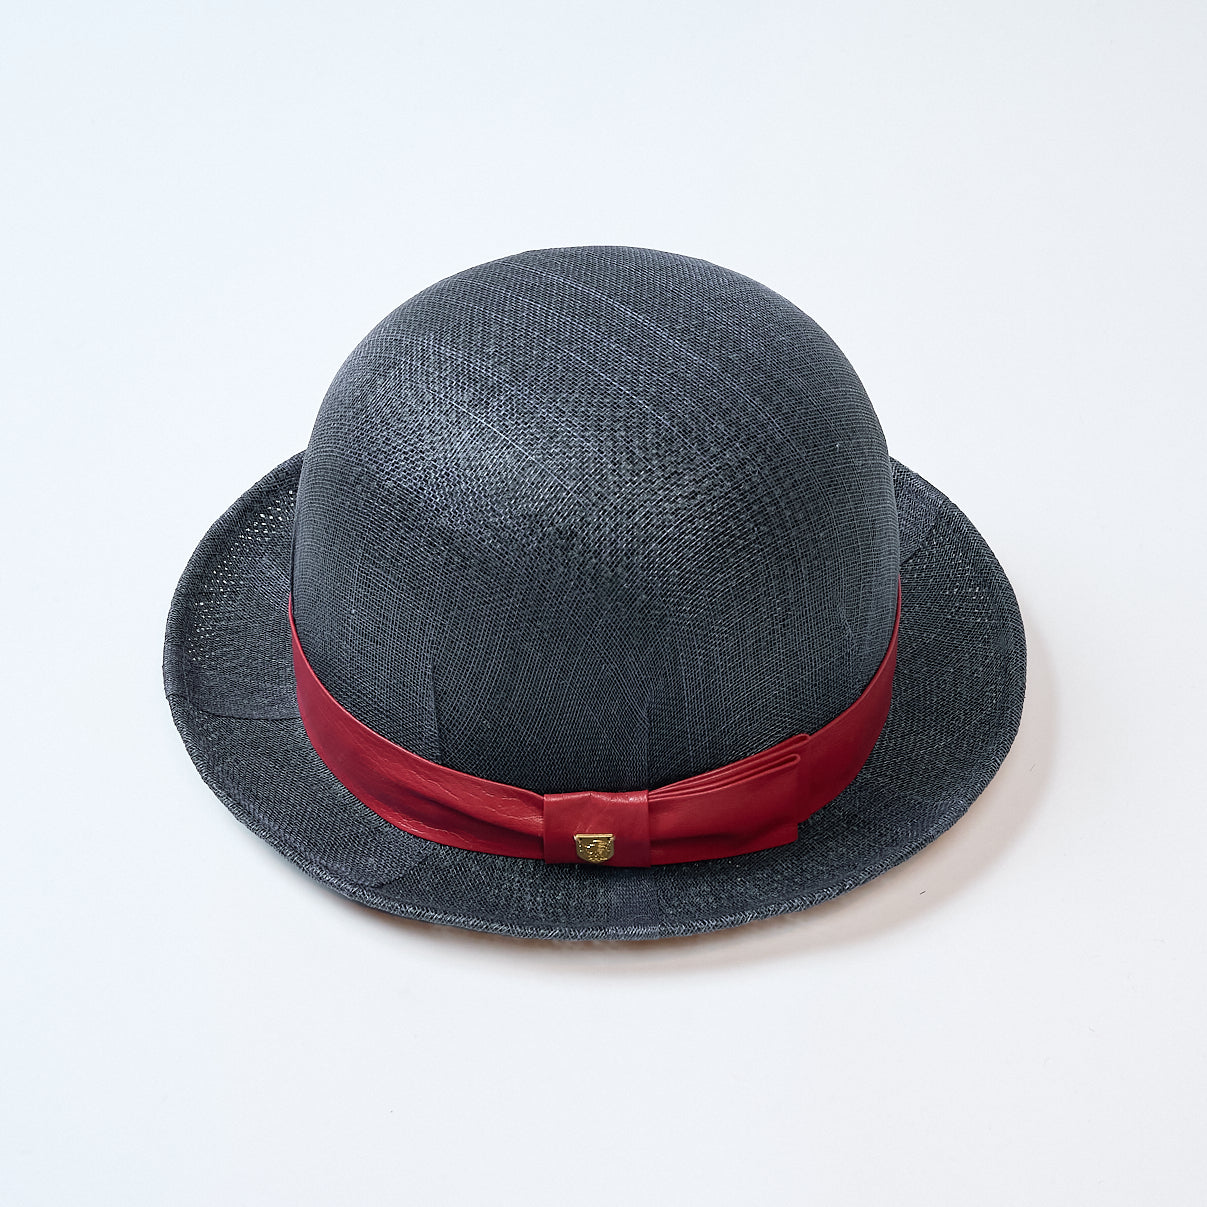 Sow Bowler's Hat